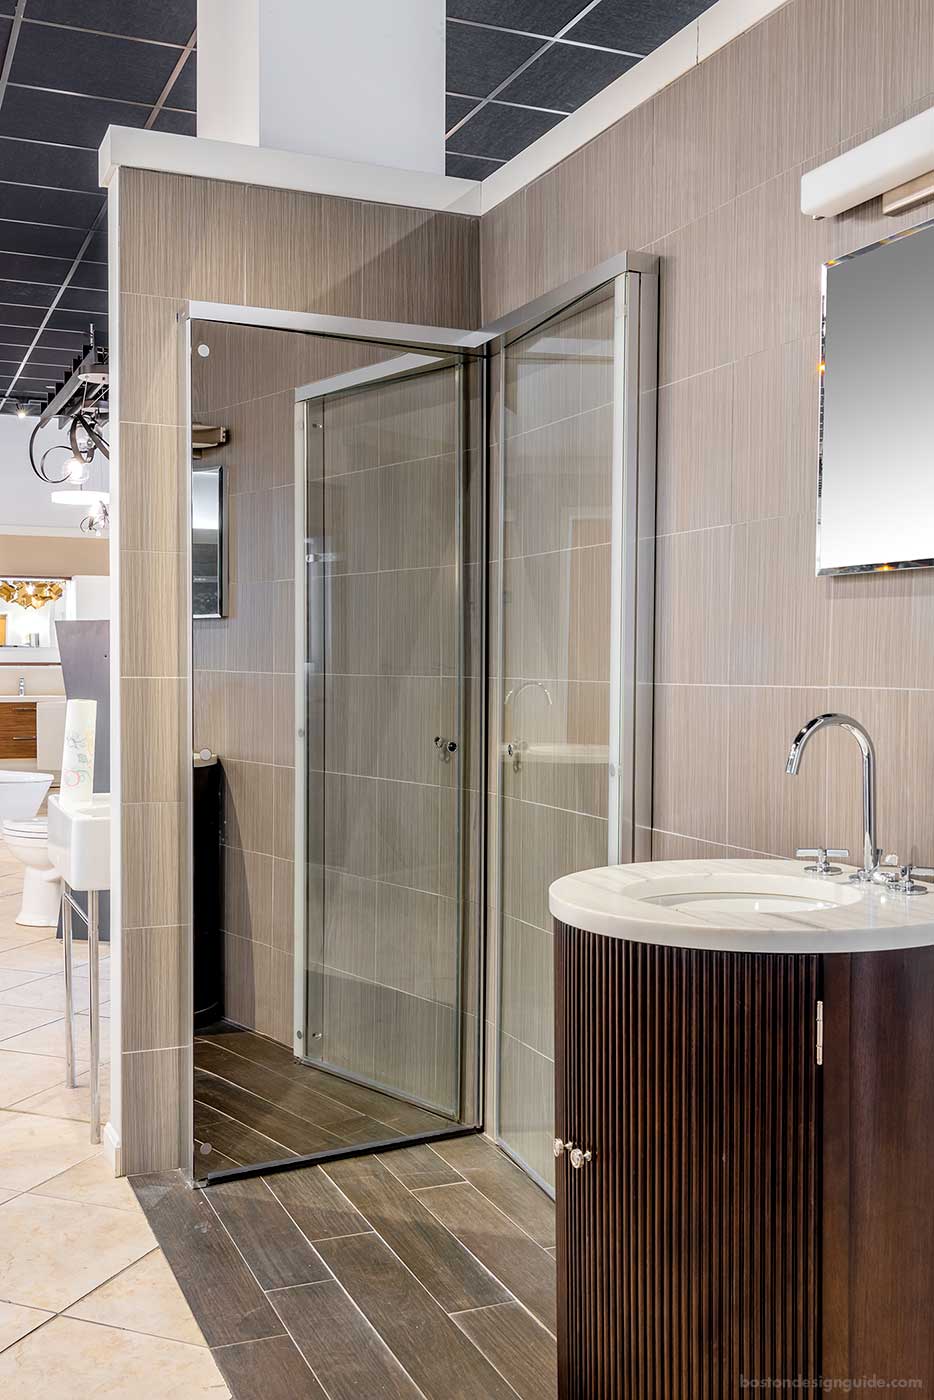 Duravit OpenSpace shower available at Frank Webb Home